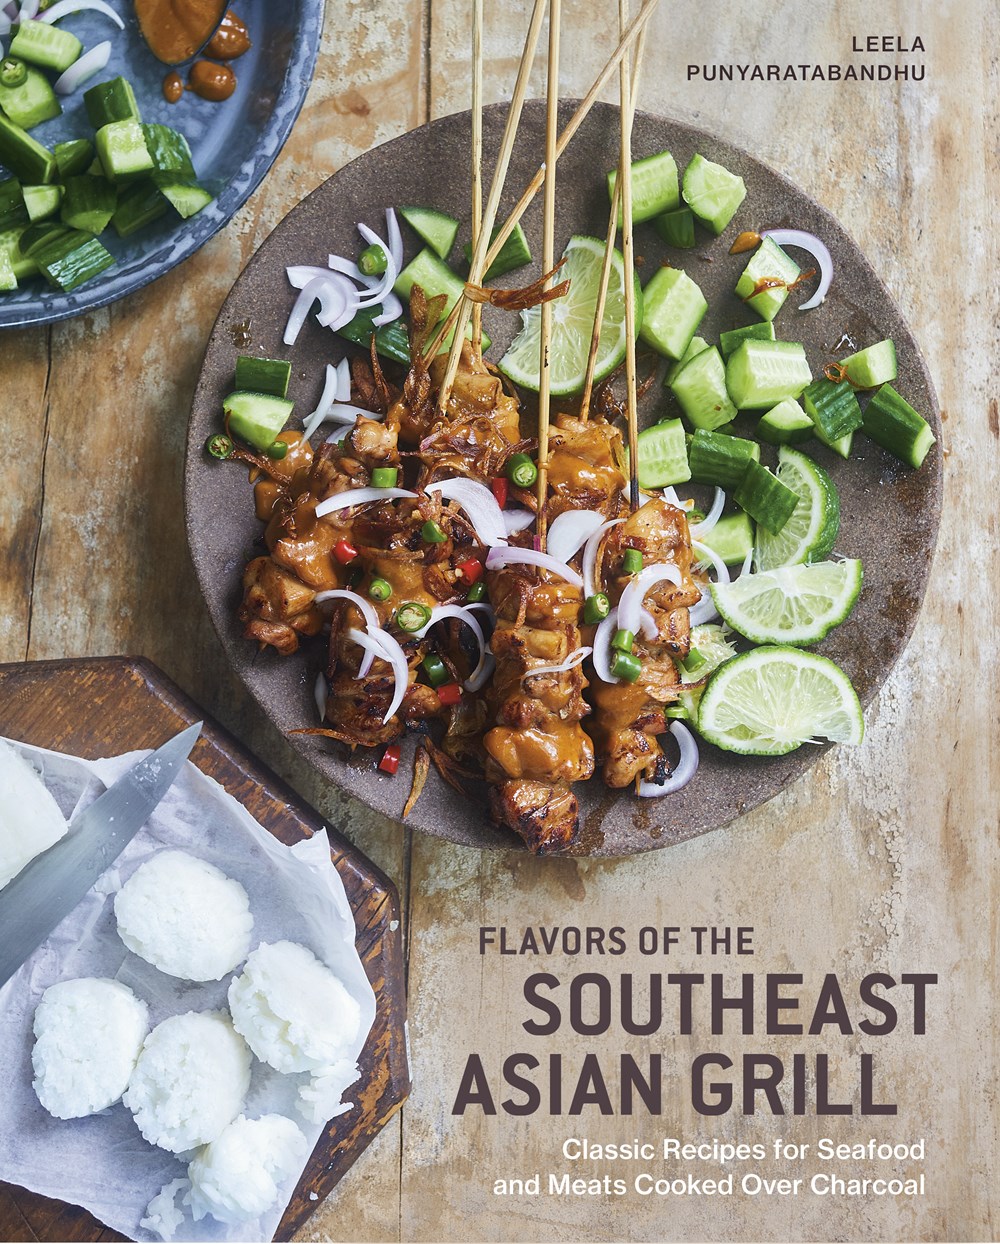 Flavors of the Southeast Asian Grill: Classic Recipes for Seafood and Meats Cooked Over Charcoal [A 